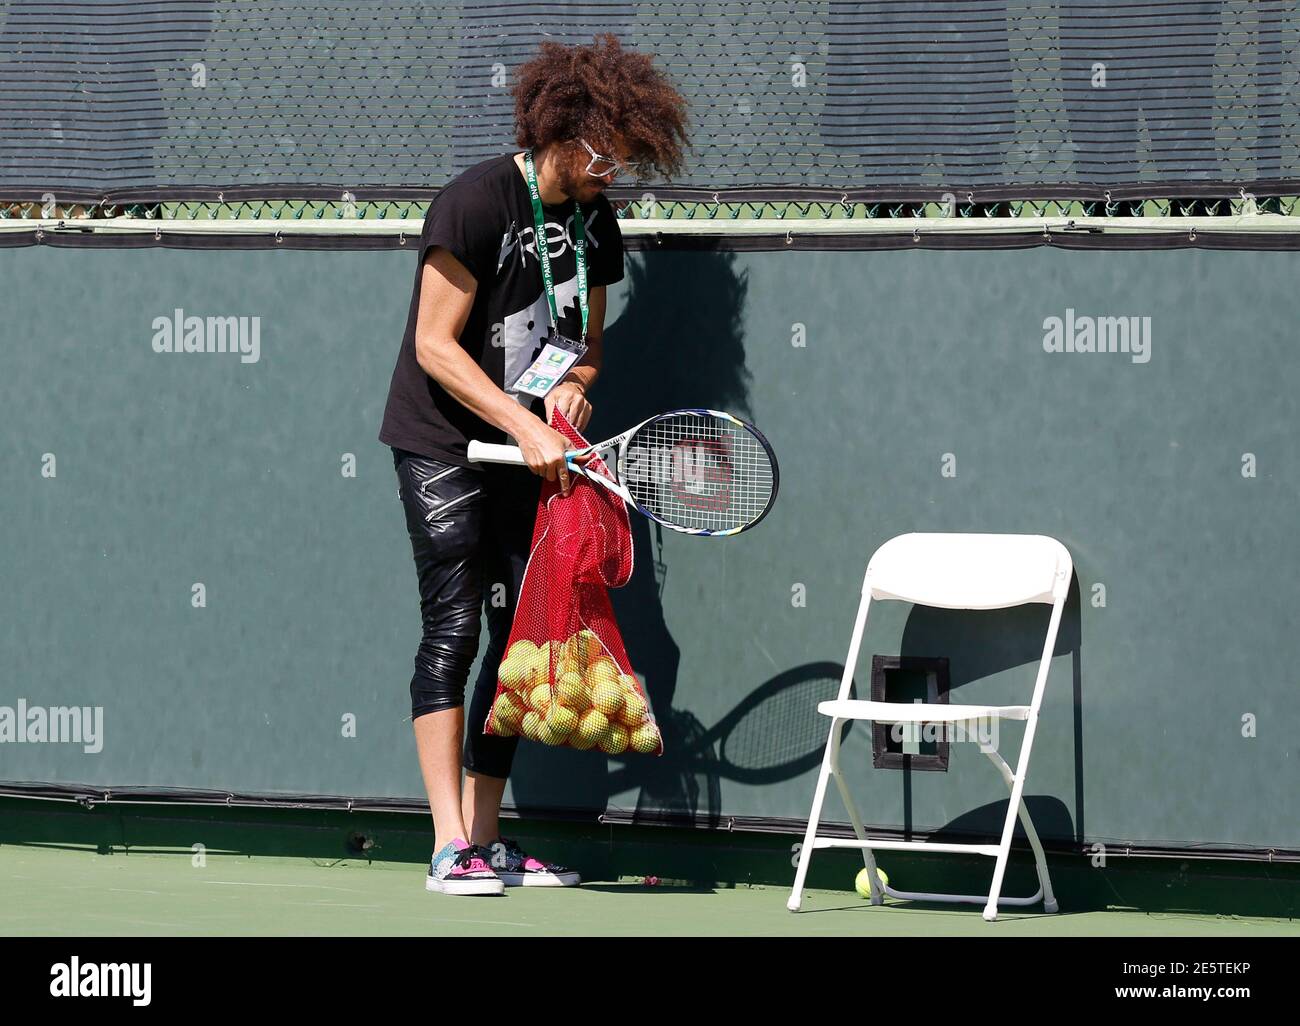 Redfoo, also known as Stefan Gordy of the band LMFAO, collects tennis balls  as his girlfriend Victoria Azarenka of Belarus attends a practice session  to prepare for the BNP Paribas Open WTA